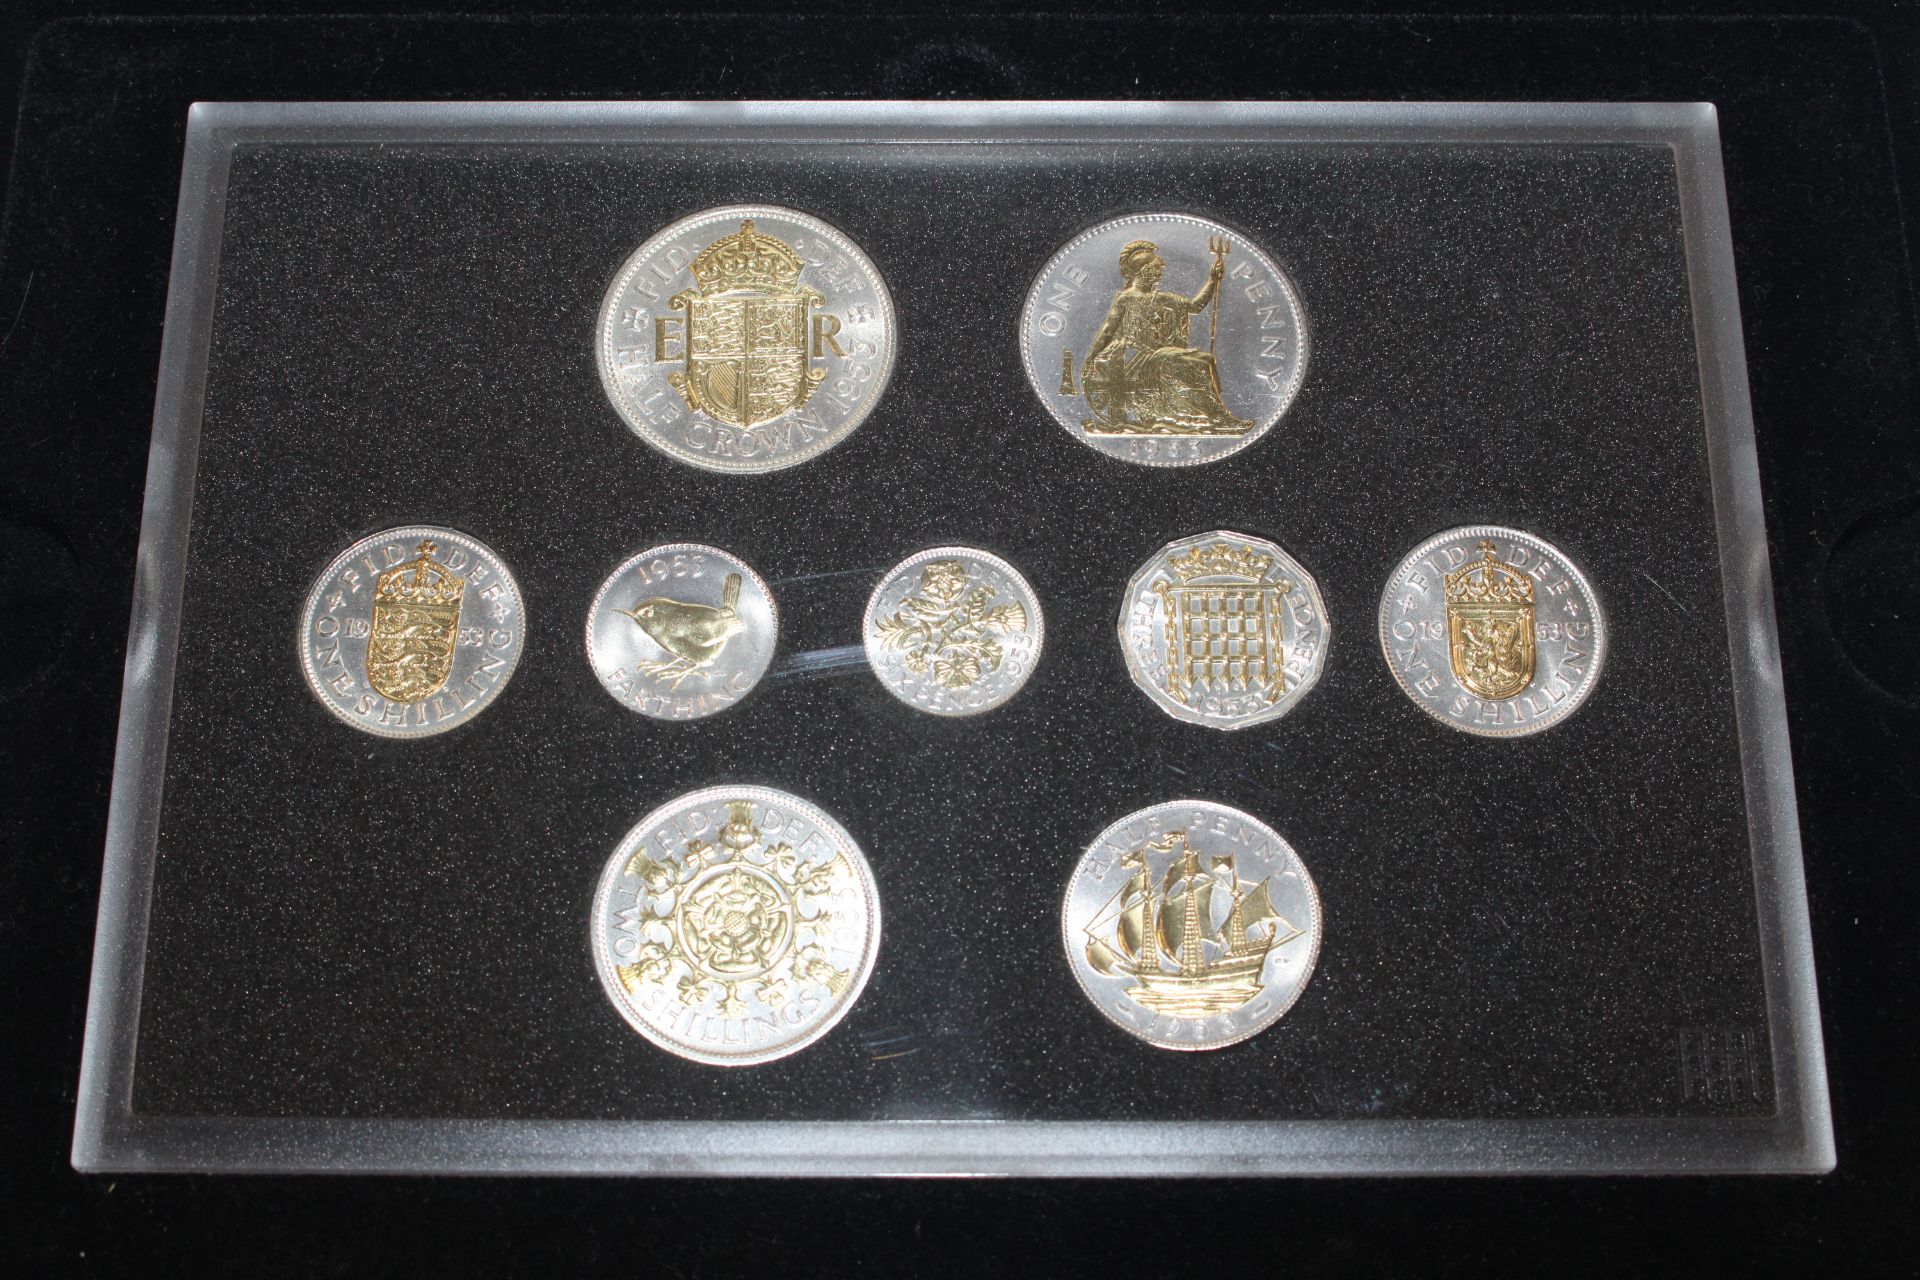 A silver and gilt plated 1953 Coronation coin set, boxed with certificate ands a £1 Beale note - Image 2 of 3